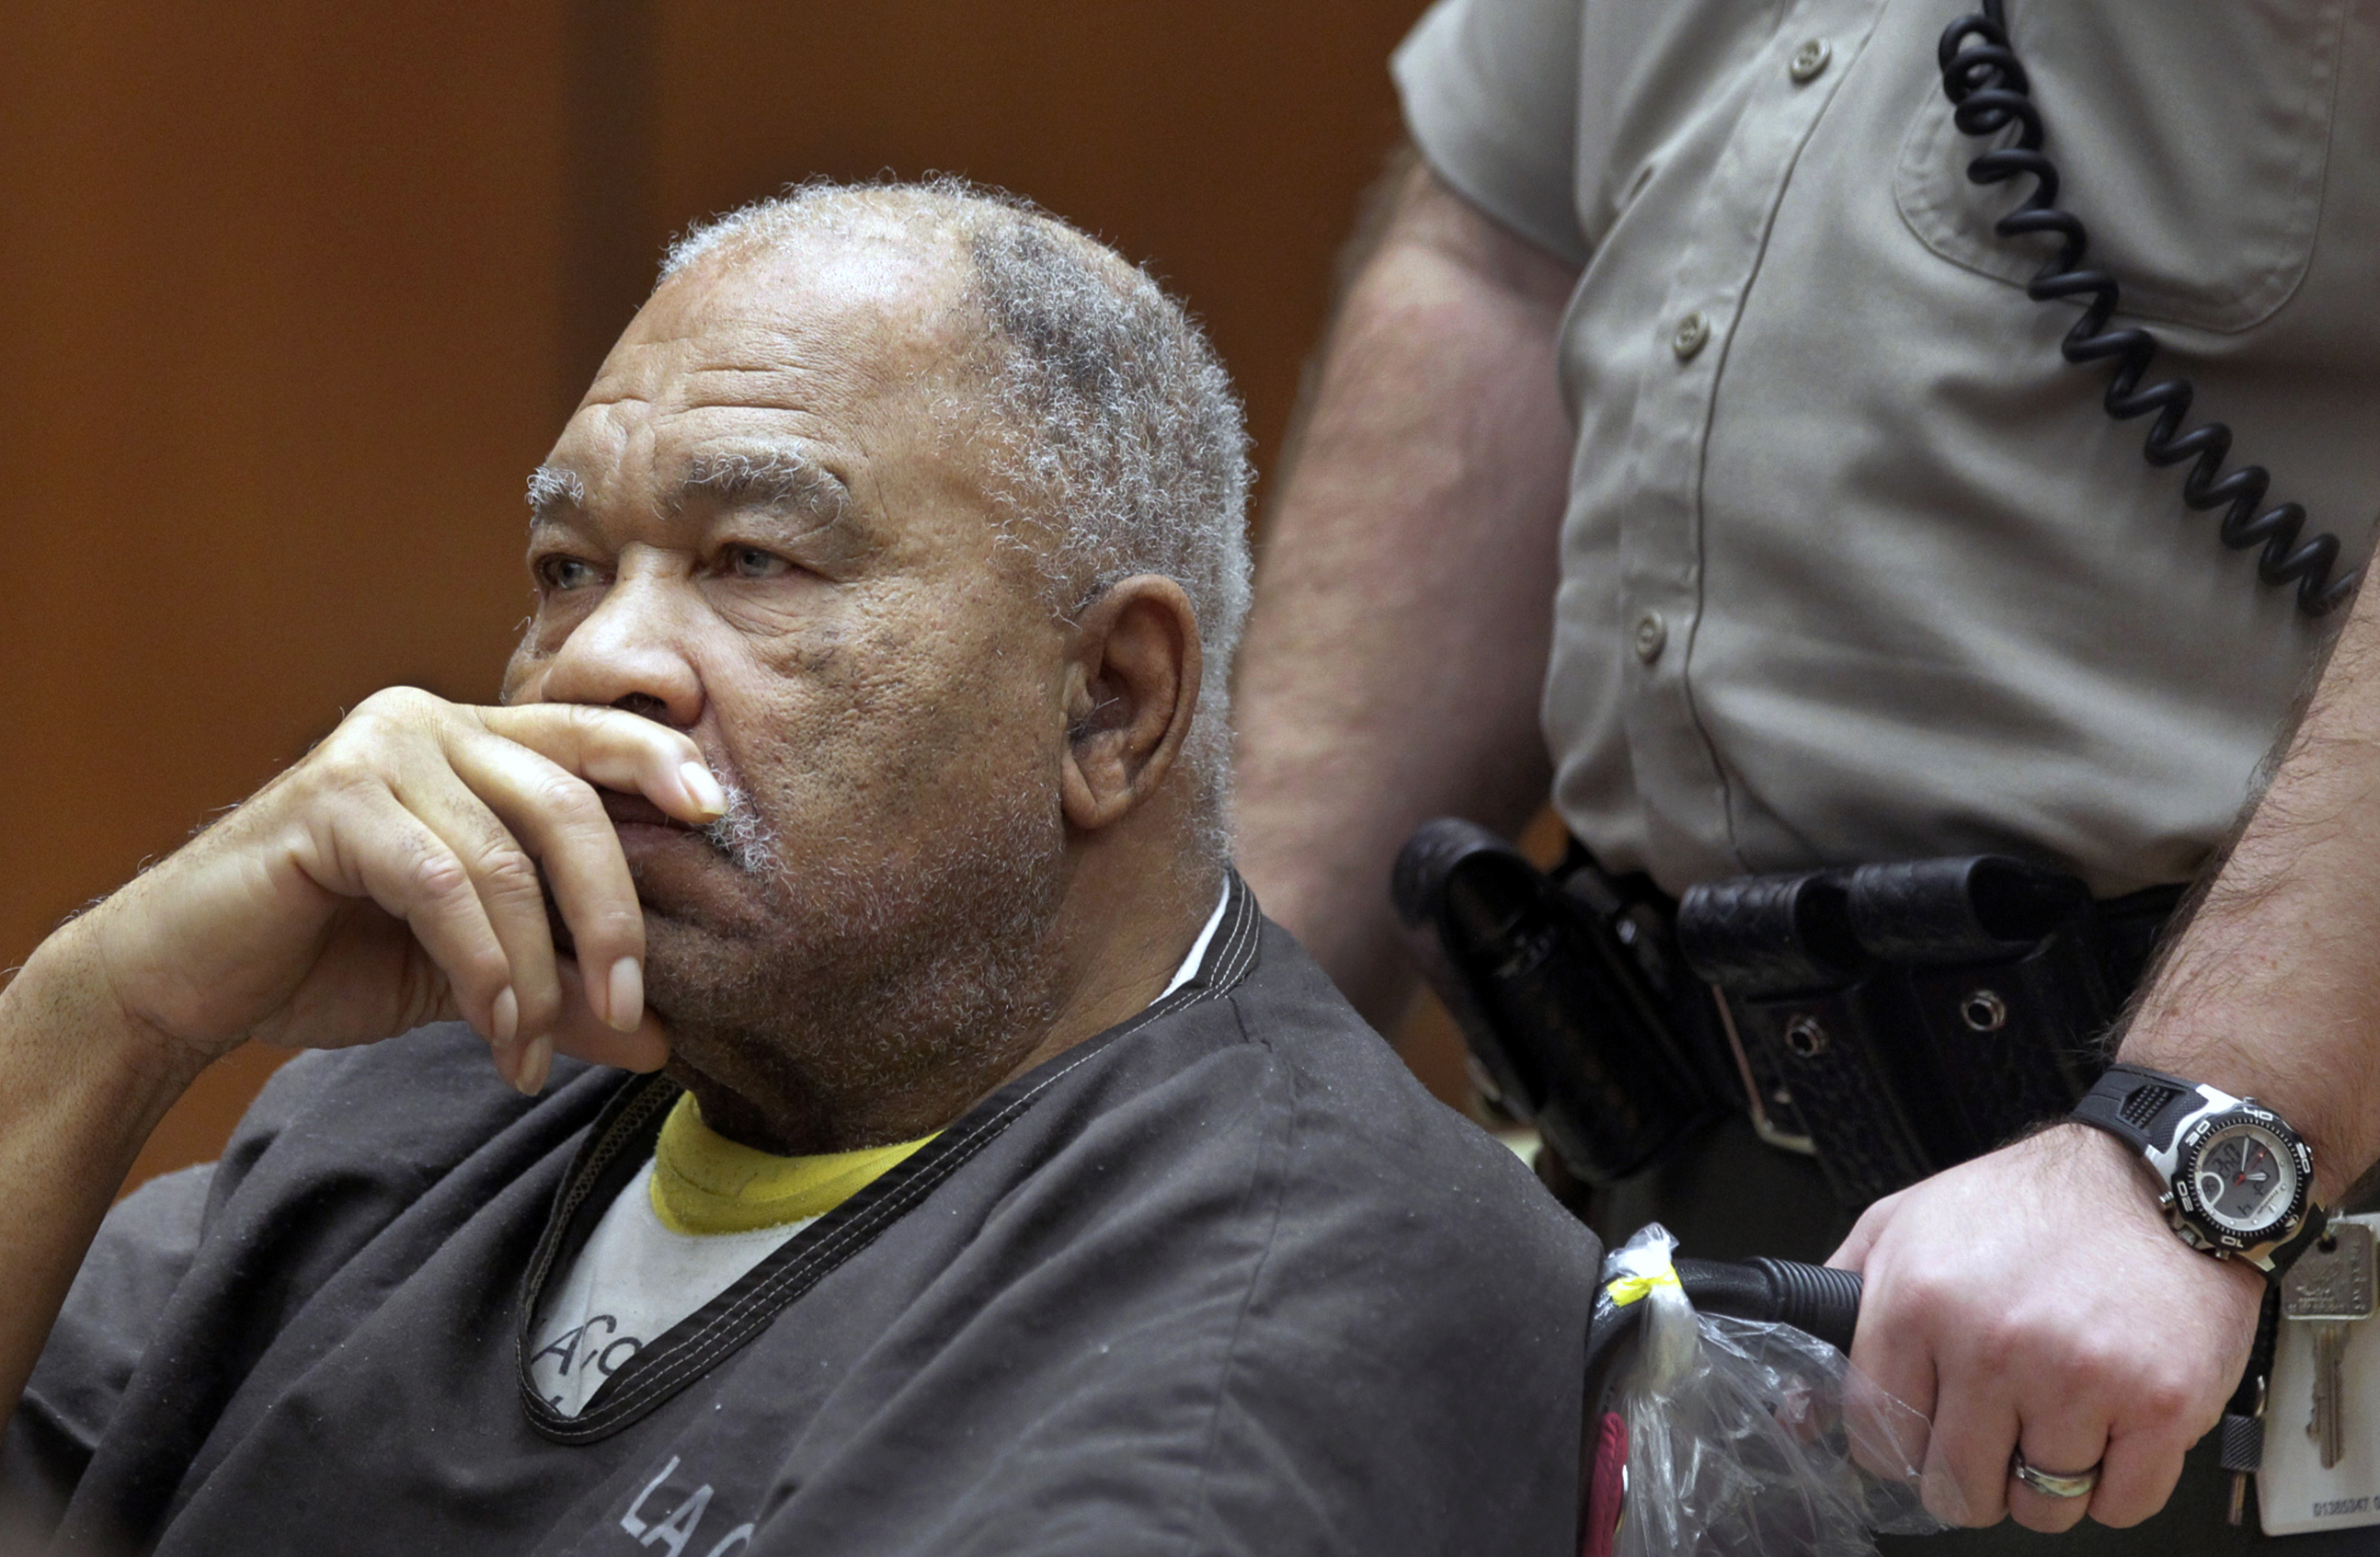 PHOTO: In this March 4, 2013, file photo, Samuel Little appears at Superior Court in Los Angeles. 